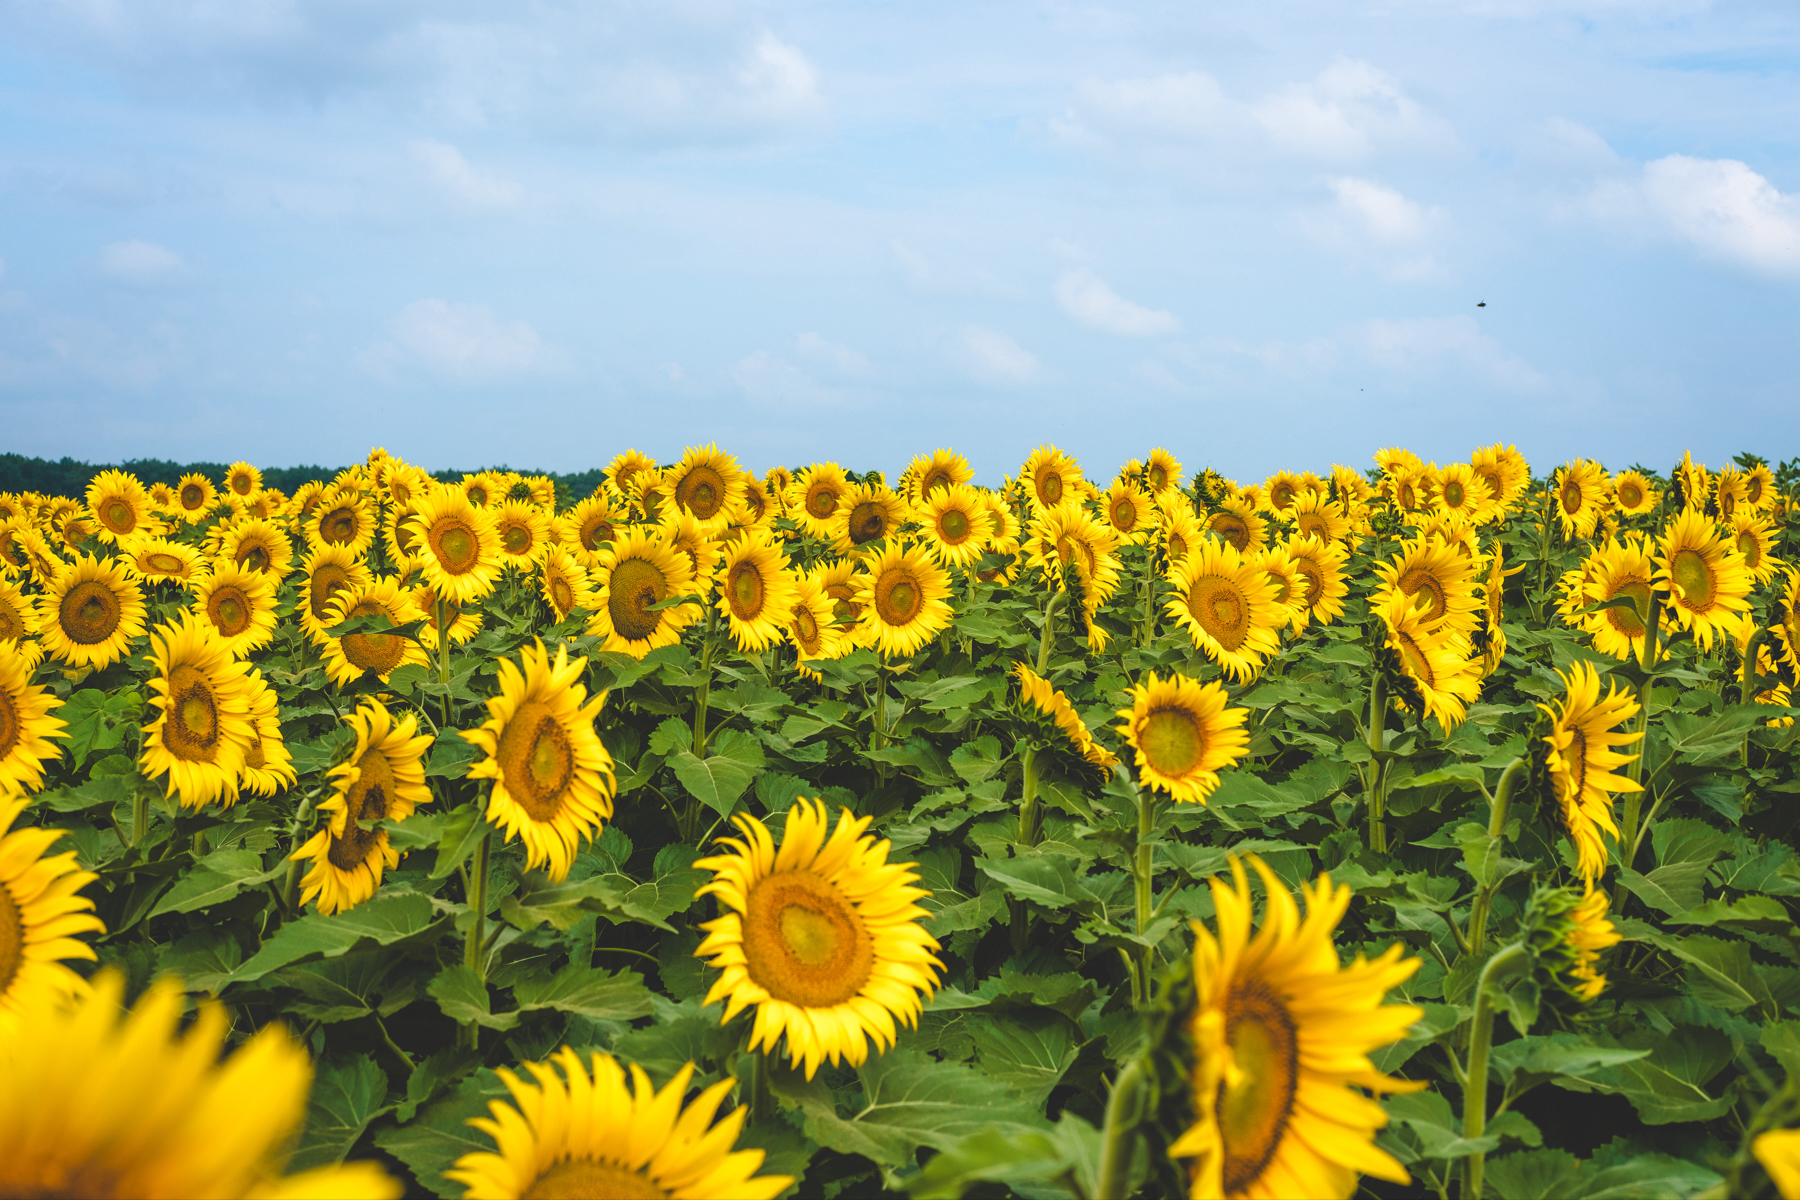 A field of blooming sunflowers under a blue sky with light clouds.